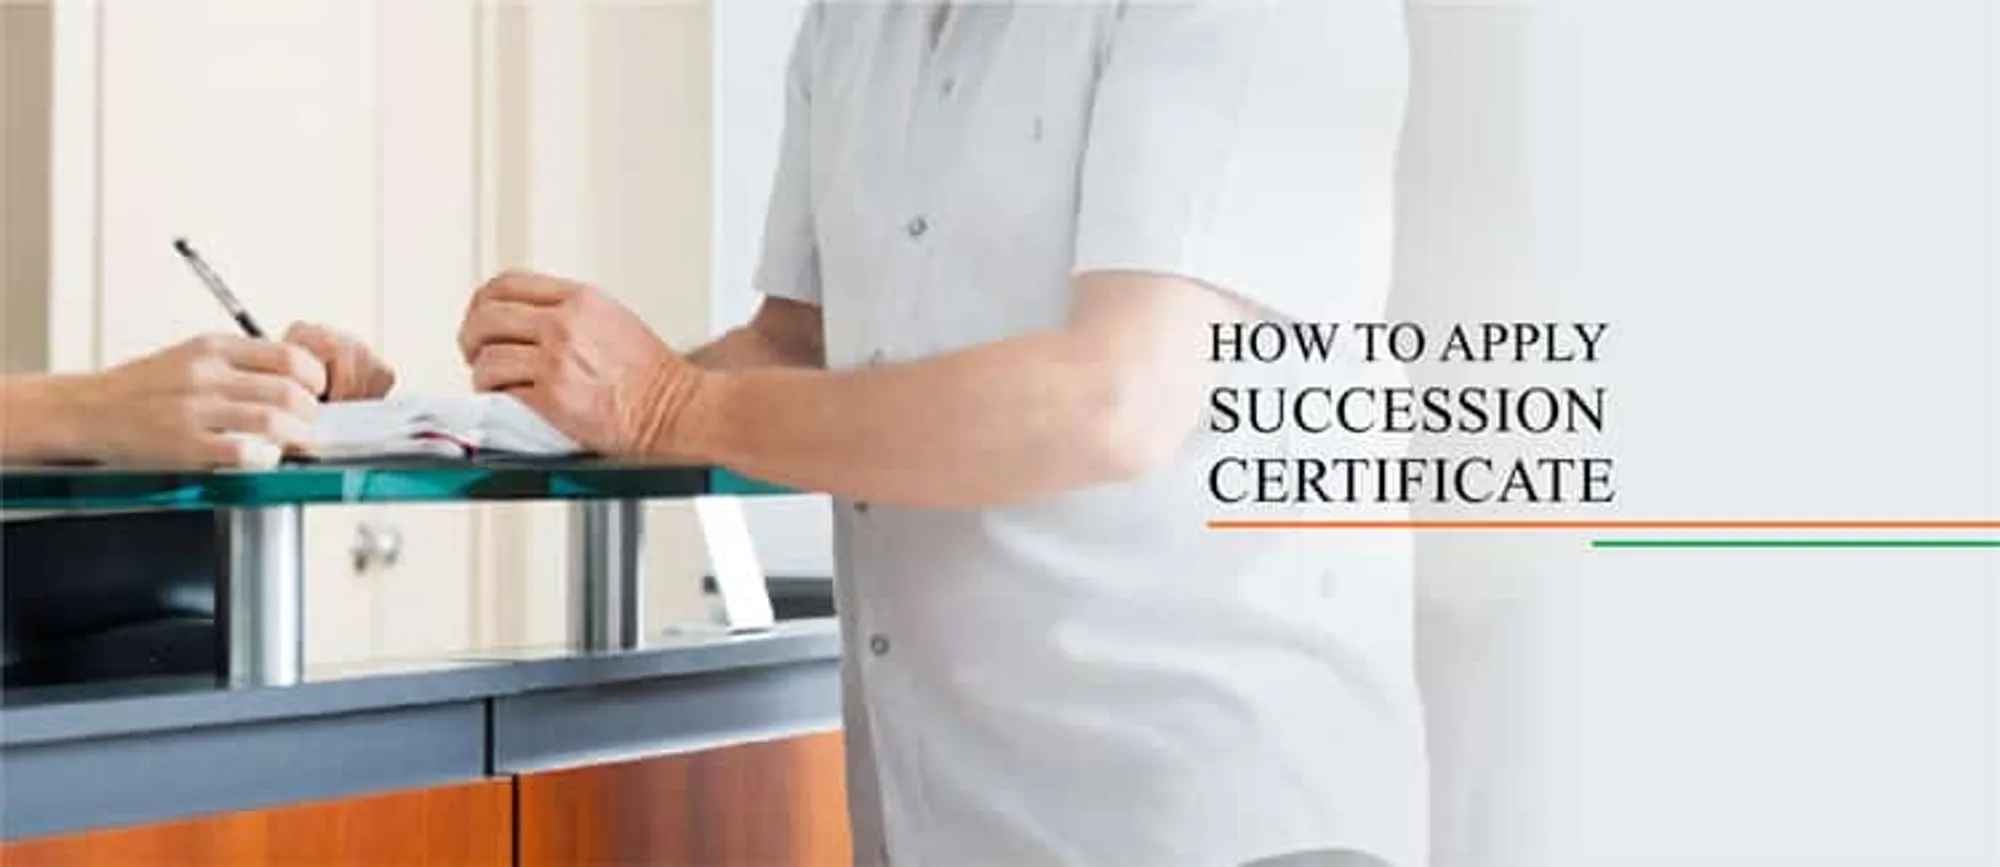 How to apply for succession certificate in the court